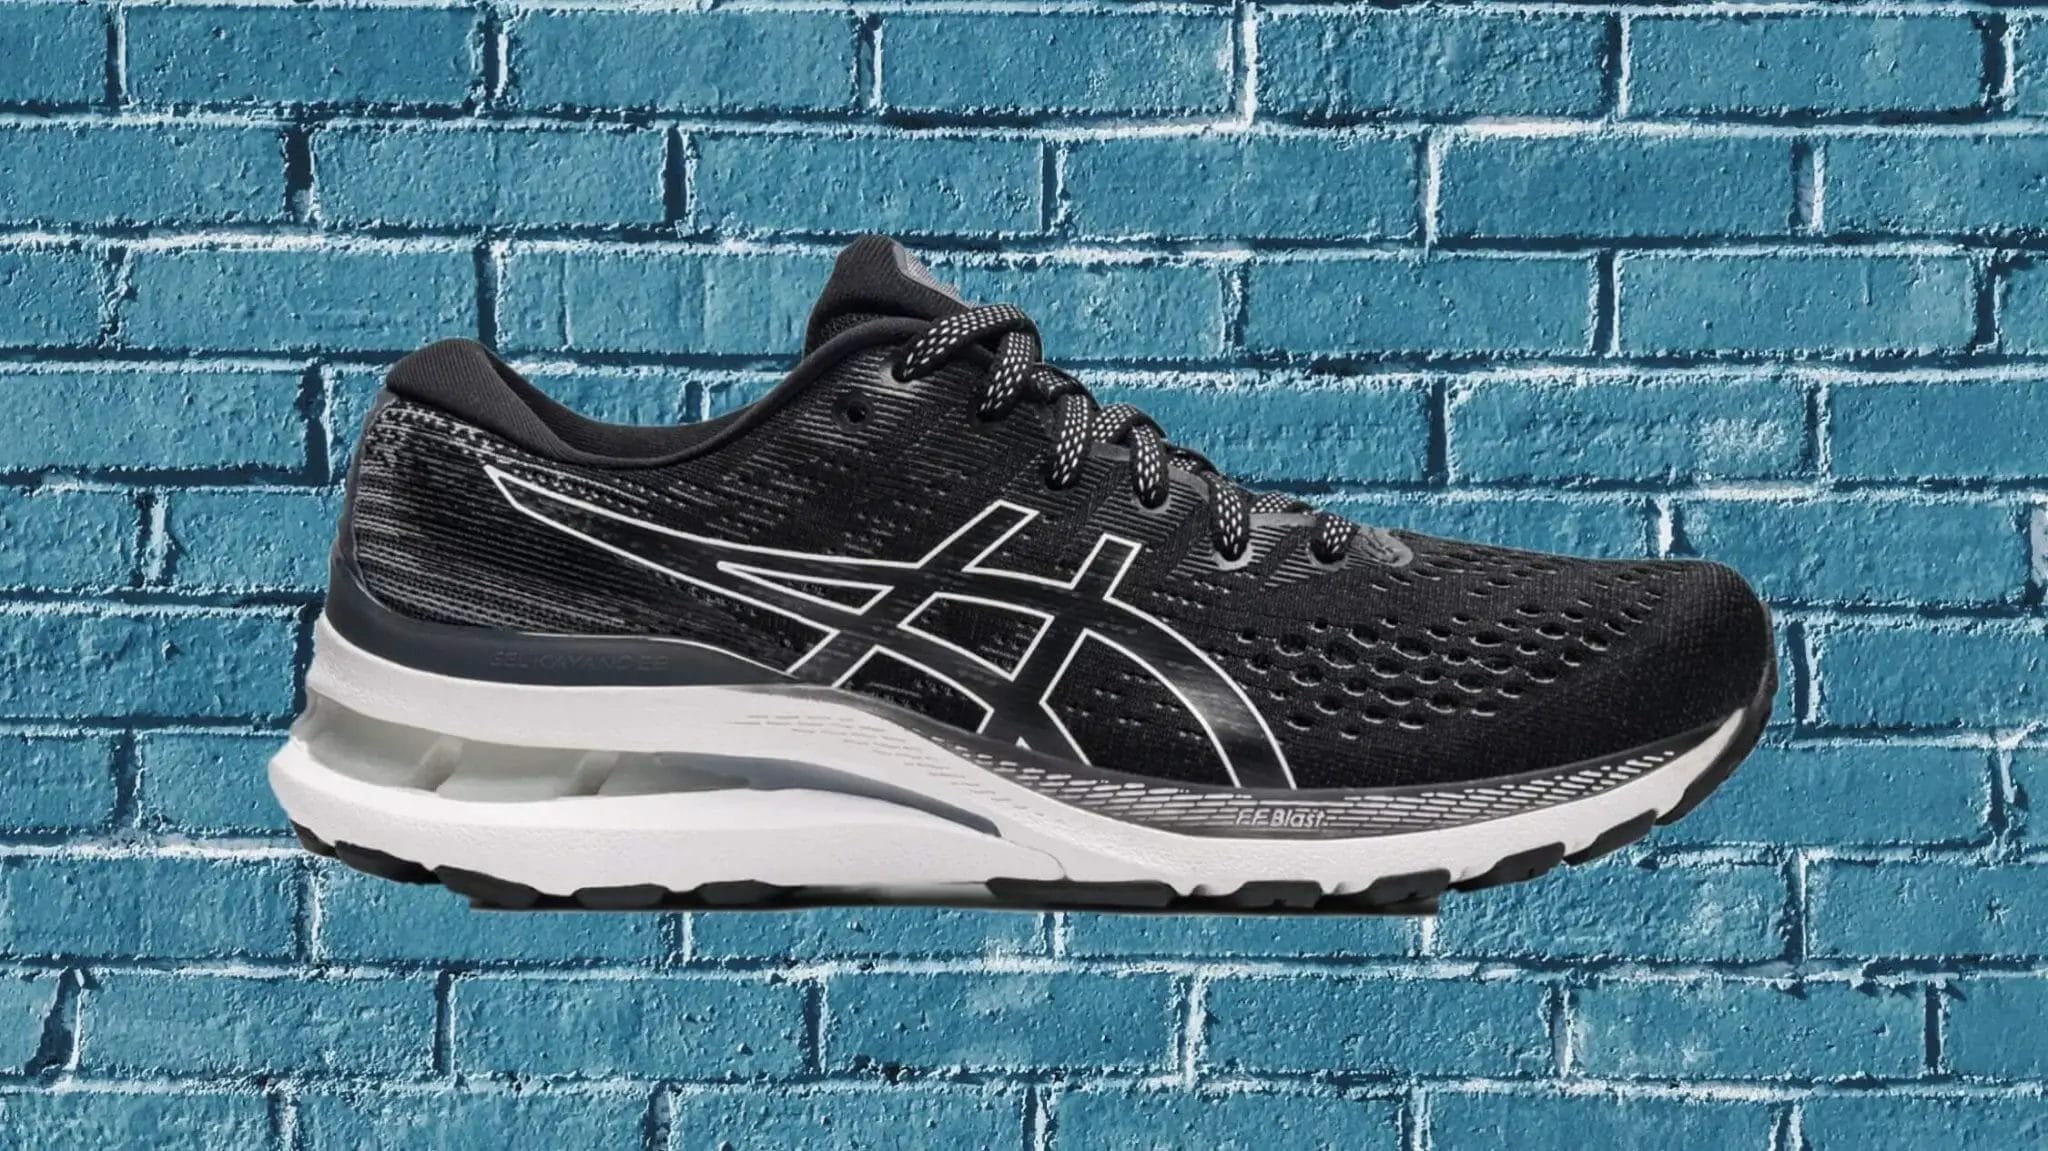 Asics Gel Kayano 28 men's running shoe for a neutral supportive ride.